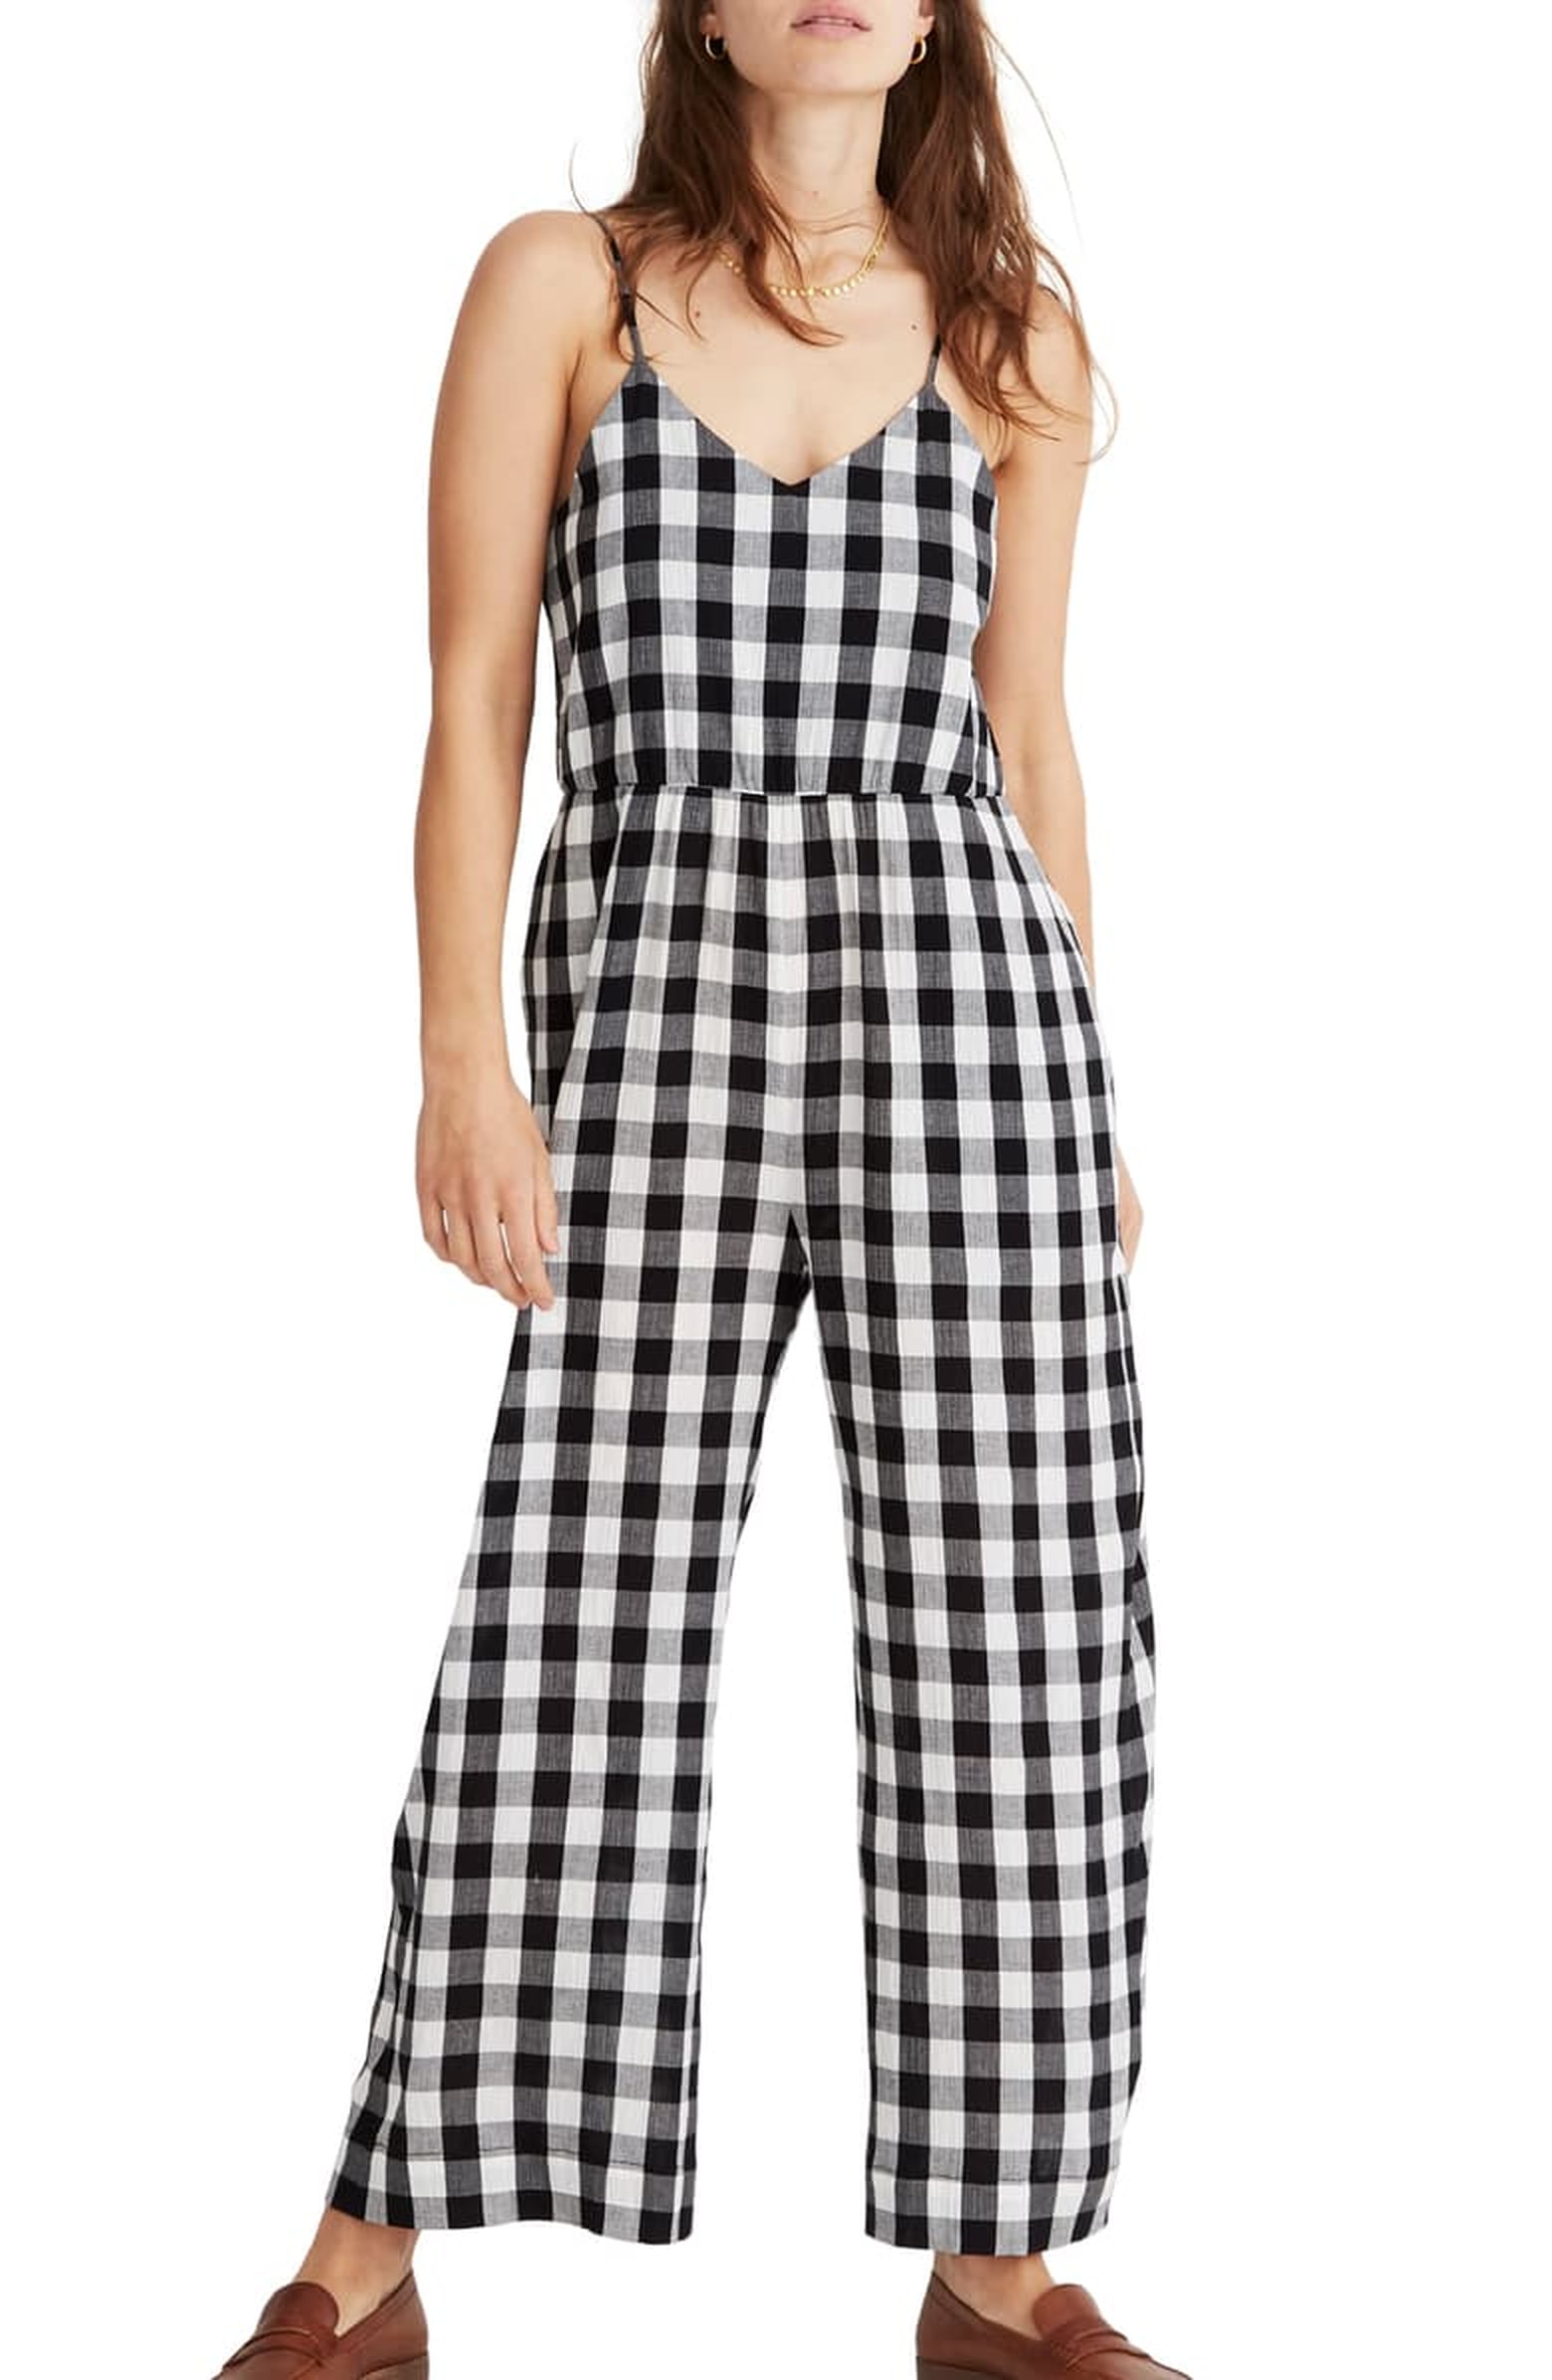 Best Cotton Jumpsuits and Rompers | POPSUGAR Fashion